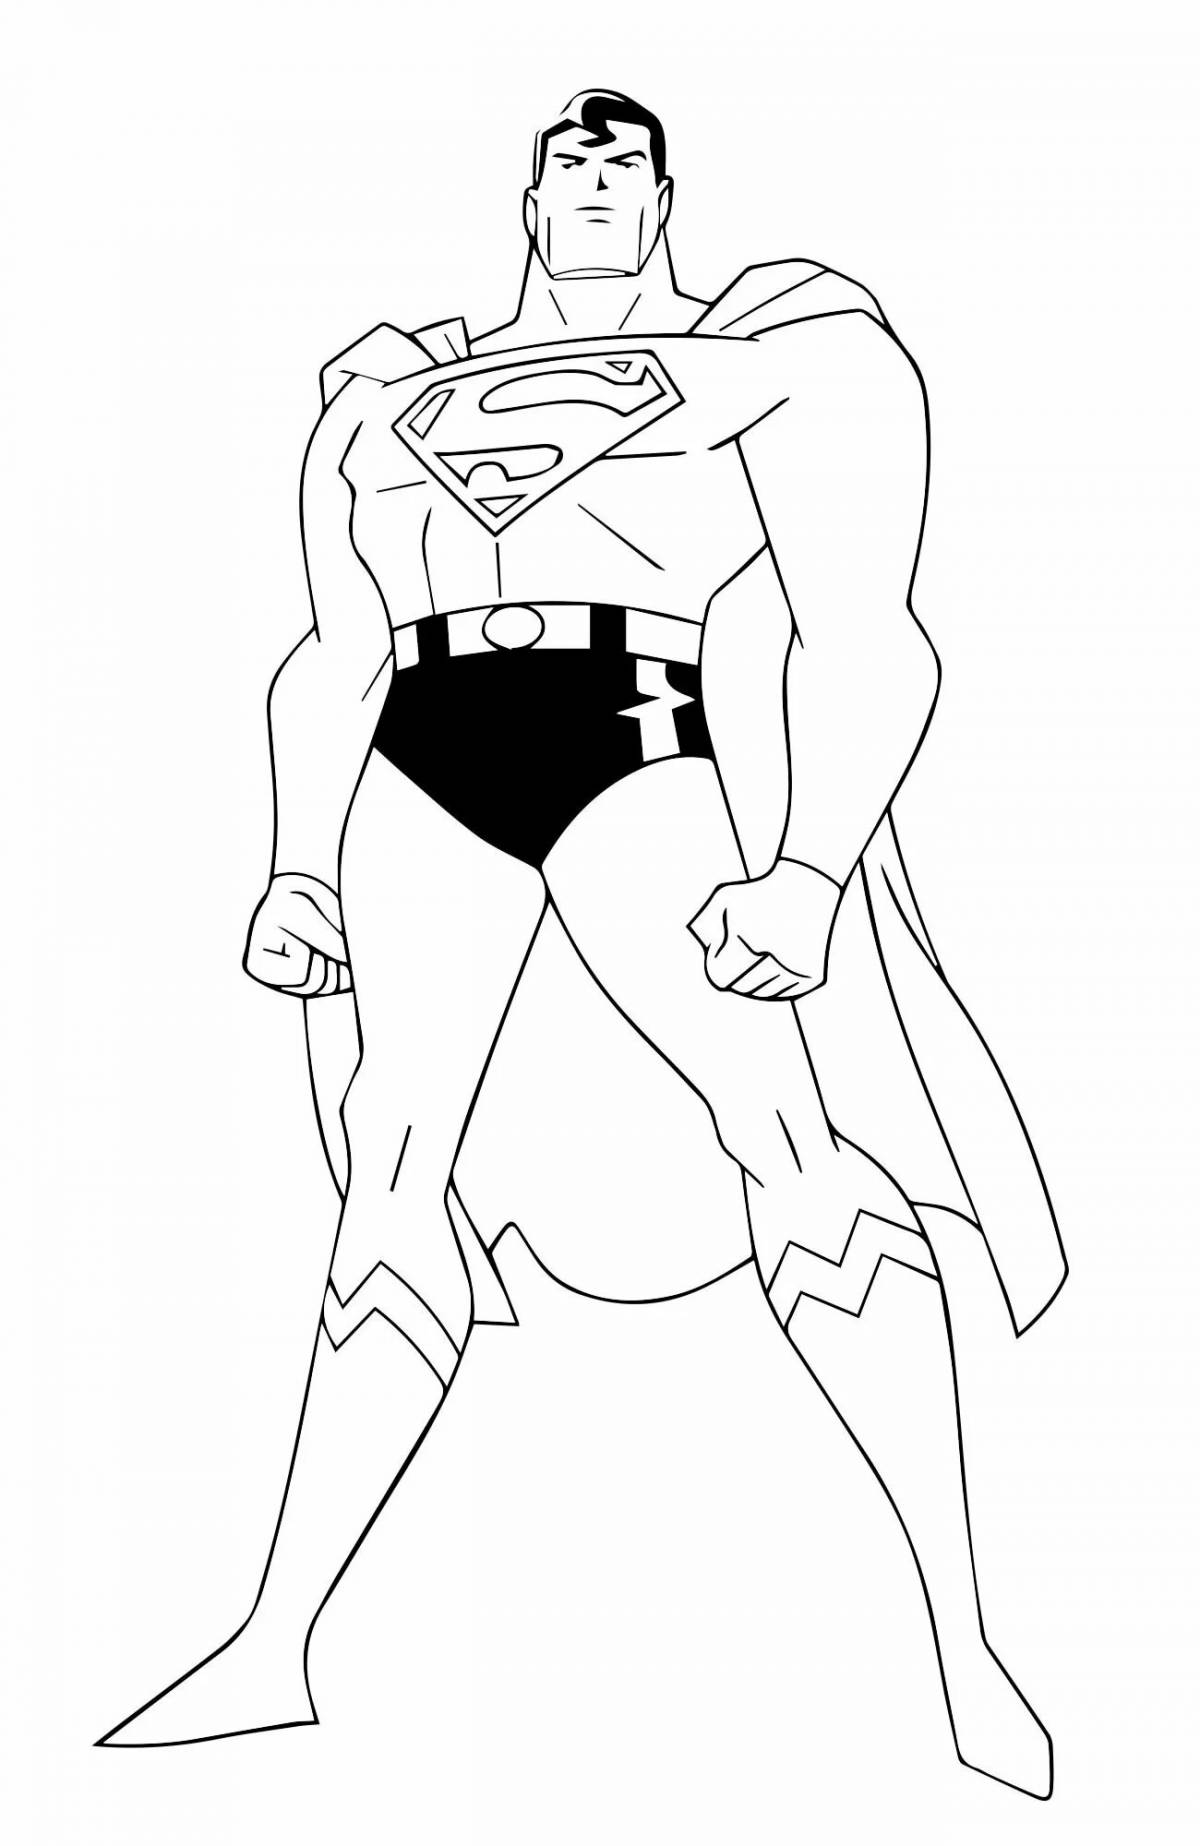 Superman coloring book for children 3-4 years old